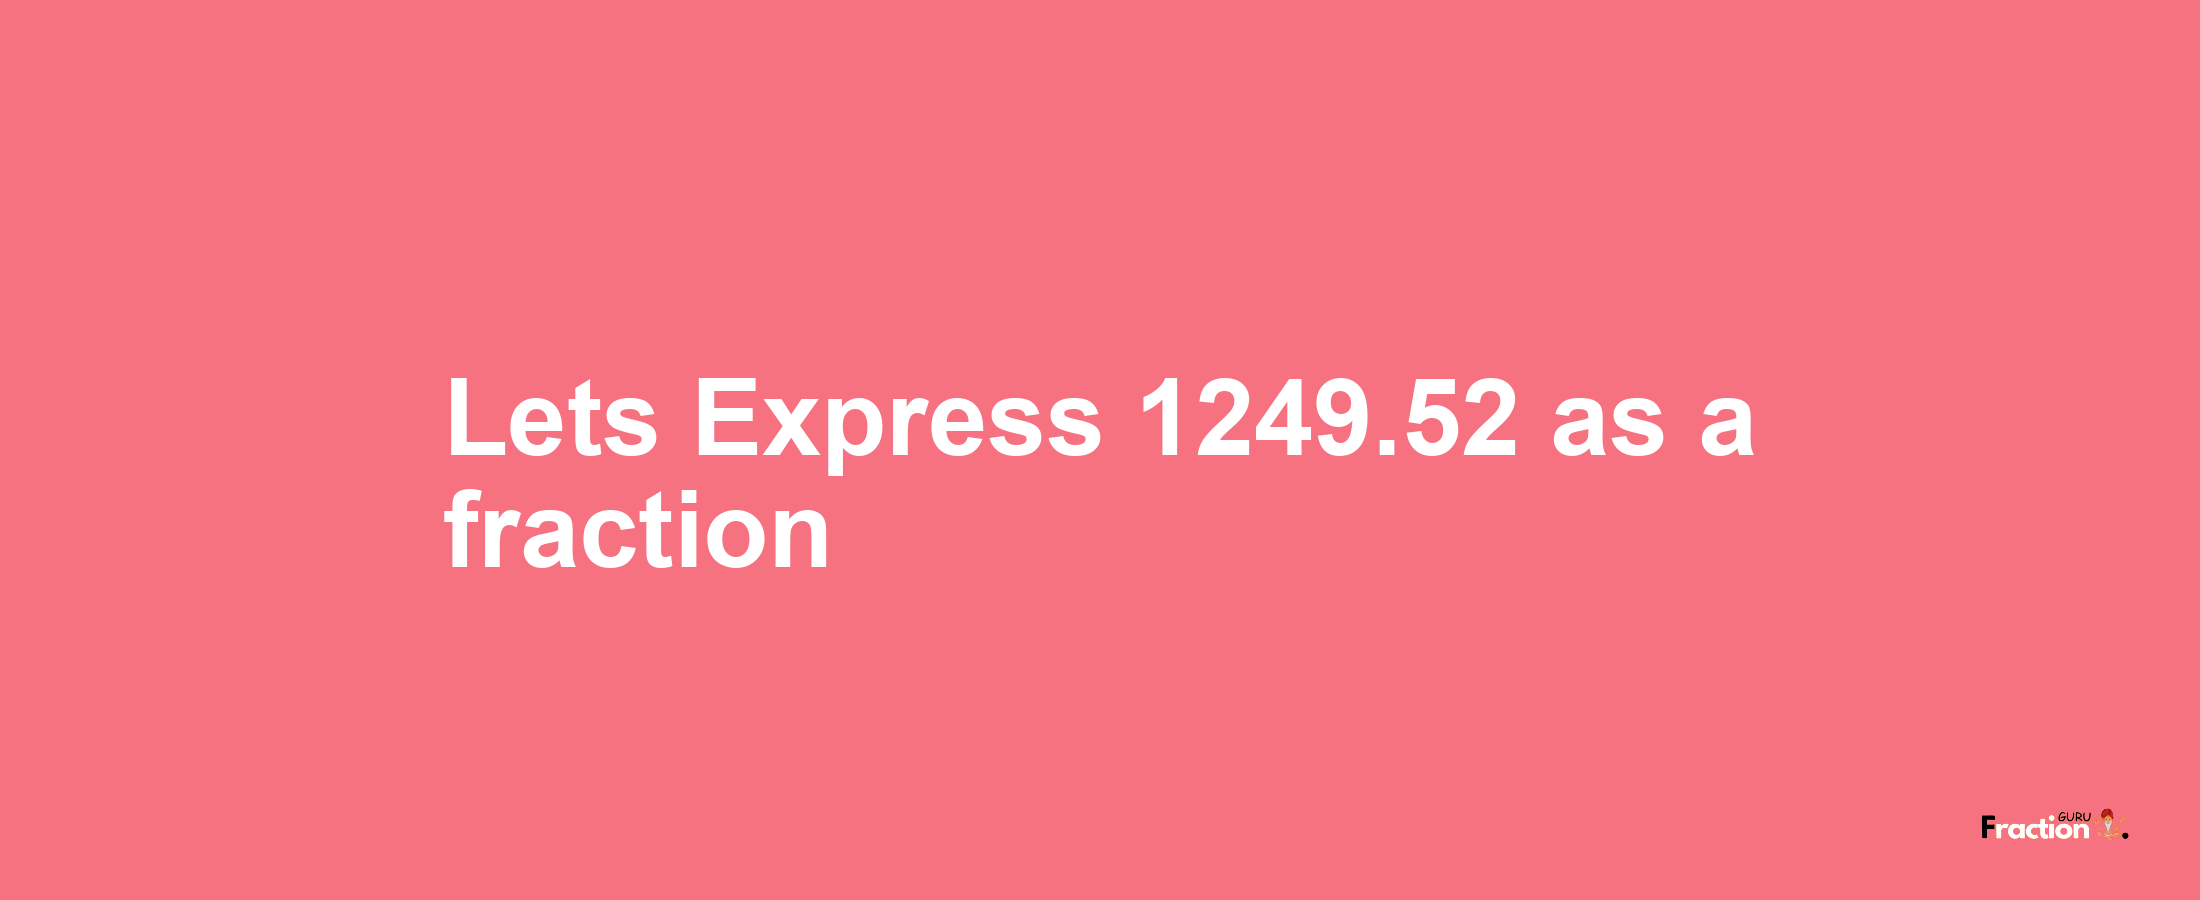 Lets Express 1249.52 as afraction